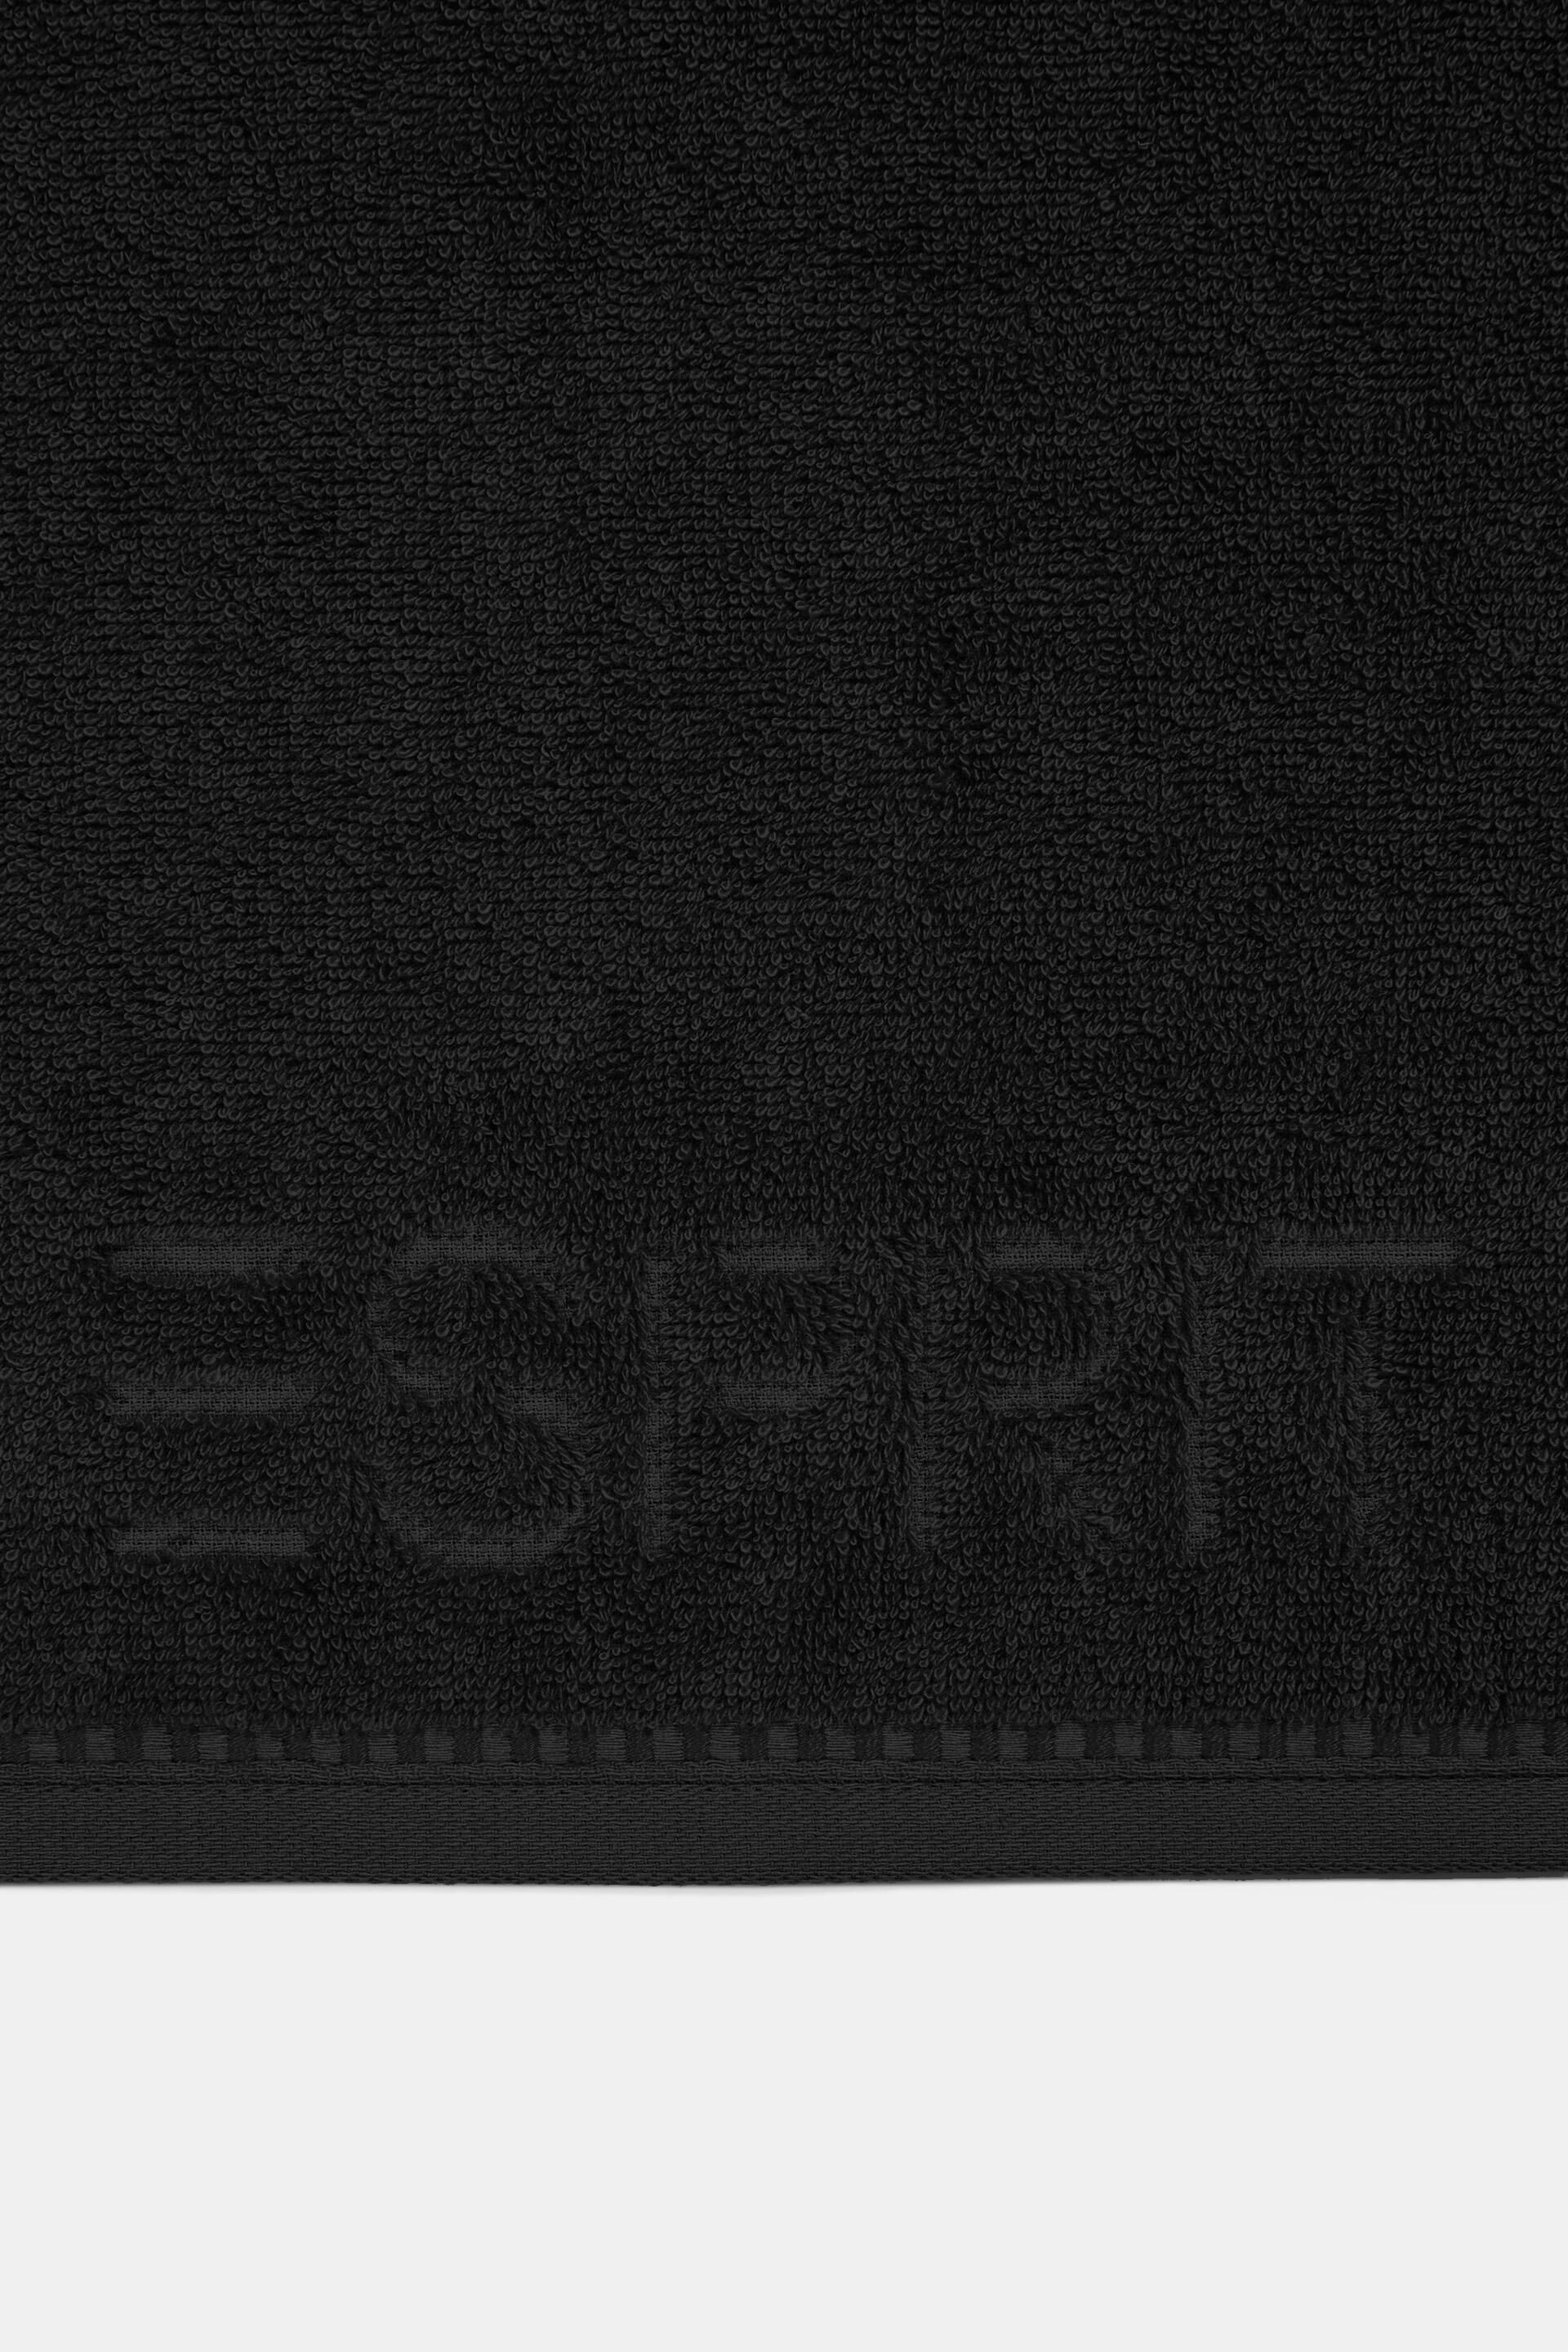 Esprit towel cloth collection Terry